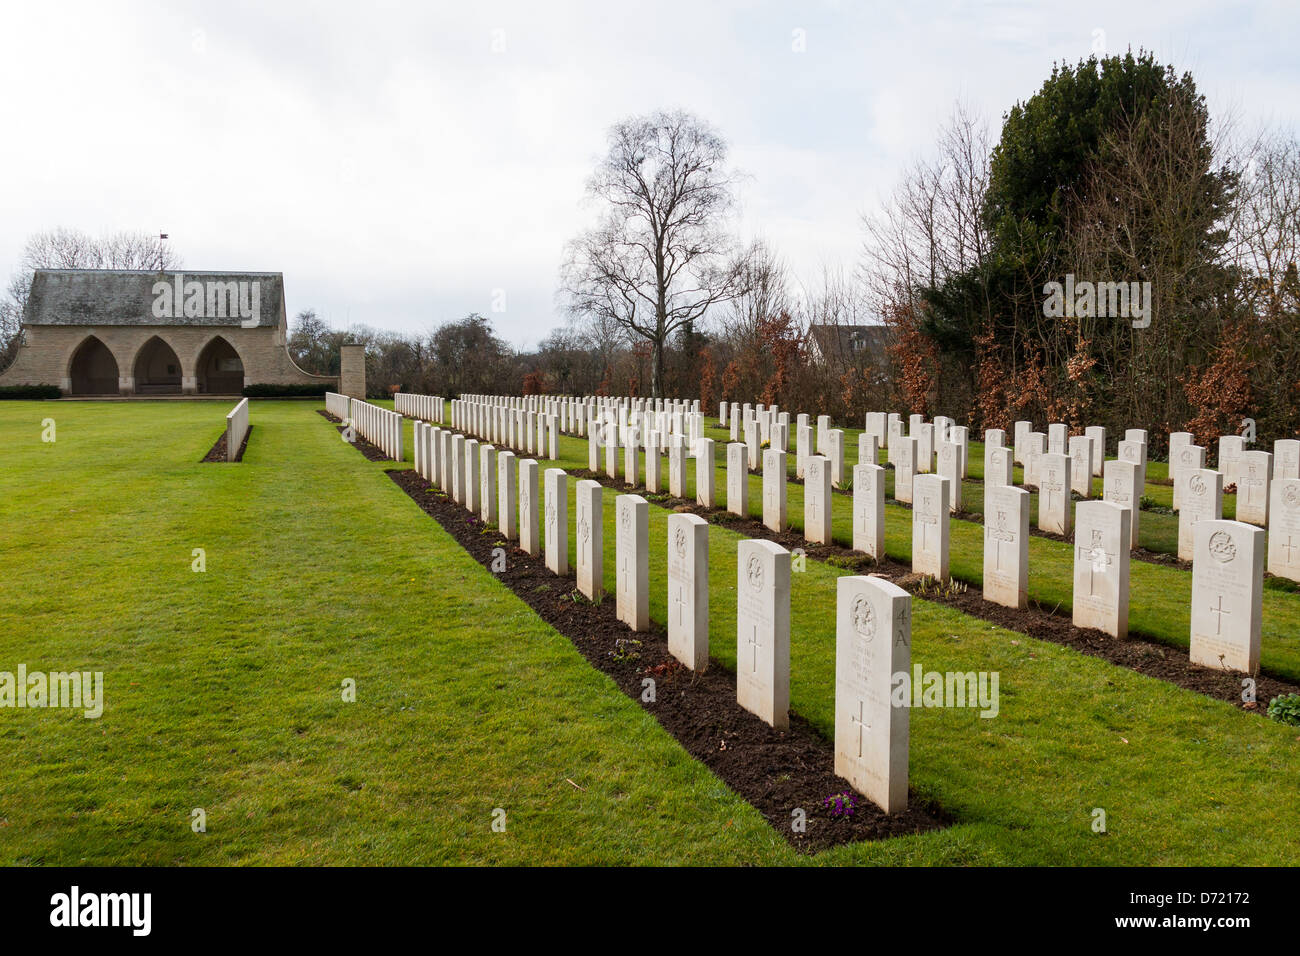 English Memorial and Military cemetery of second war (1939-1945) in Hermanville-Sur-Mer, Normandy, France Stock Photo